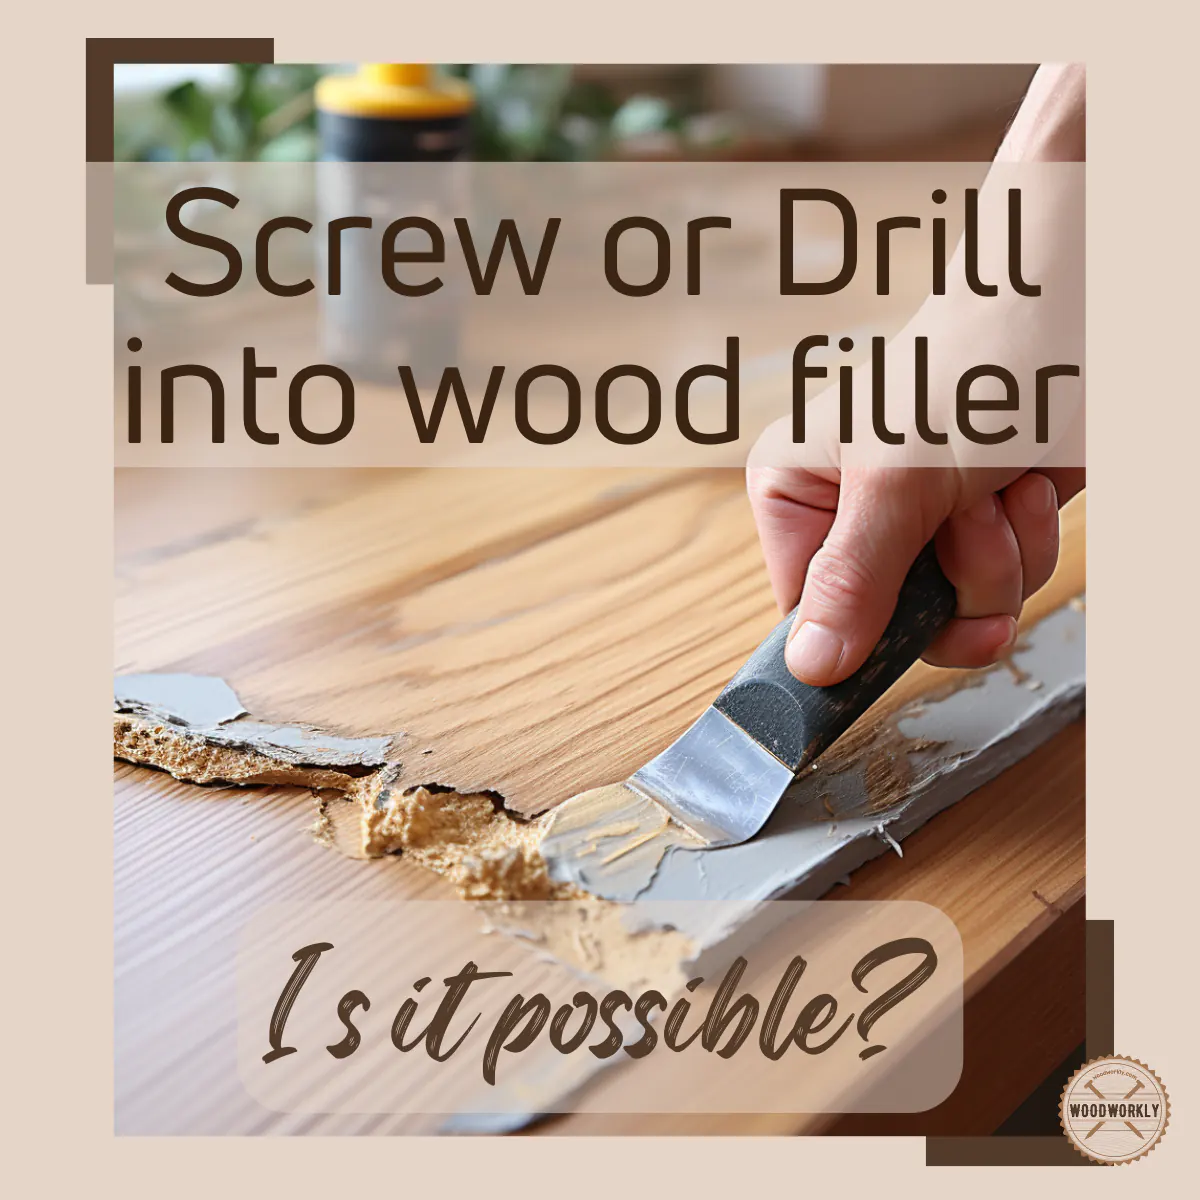 Can You Screw into Wood Filler